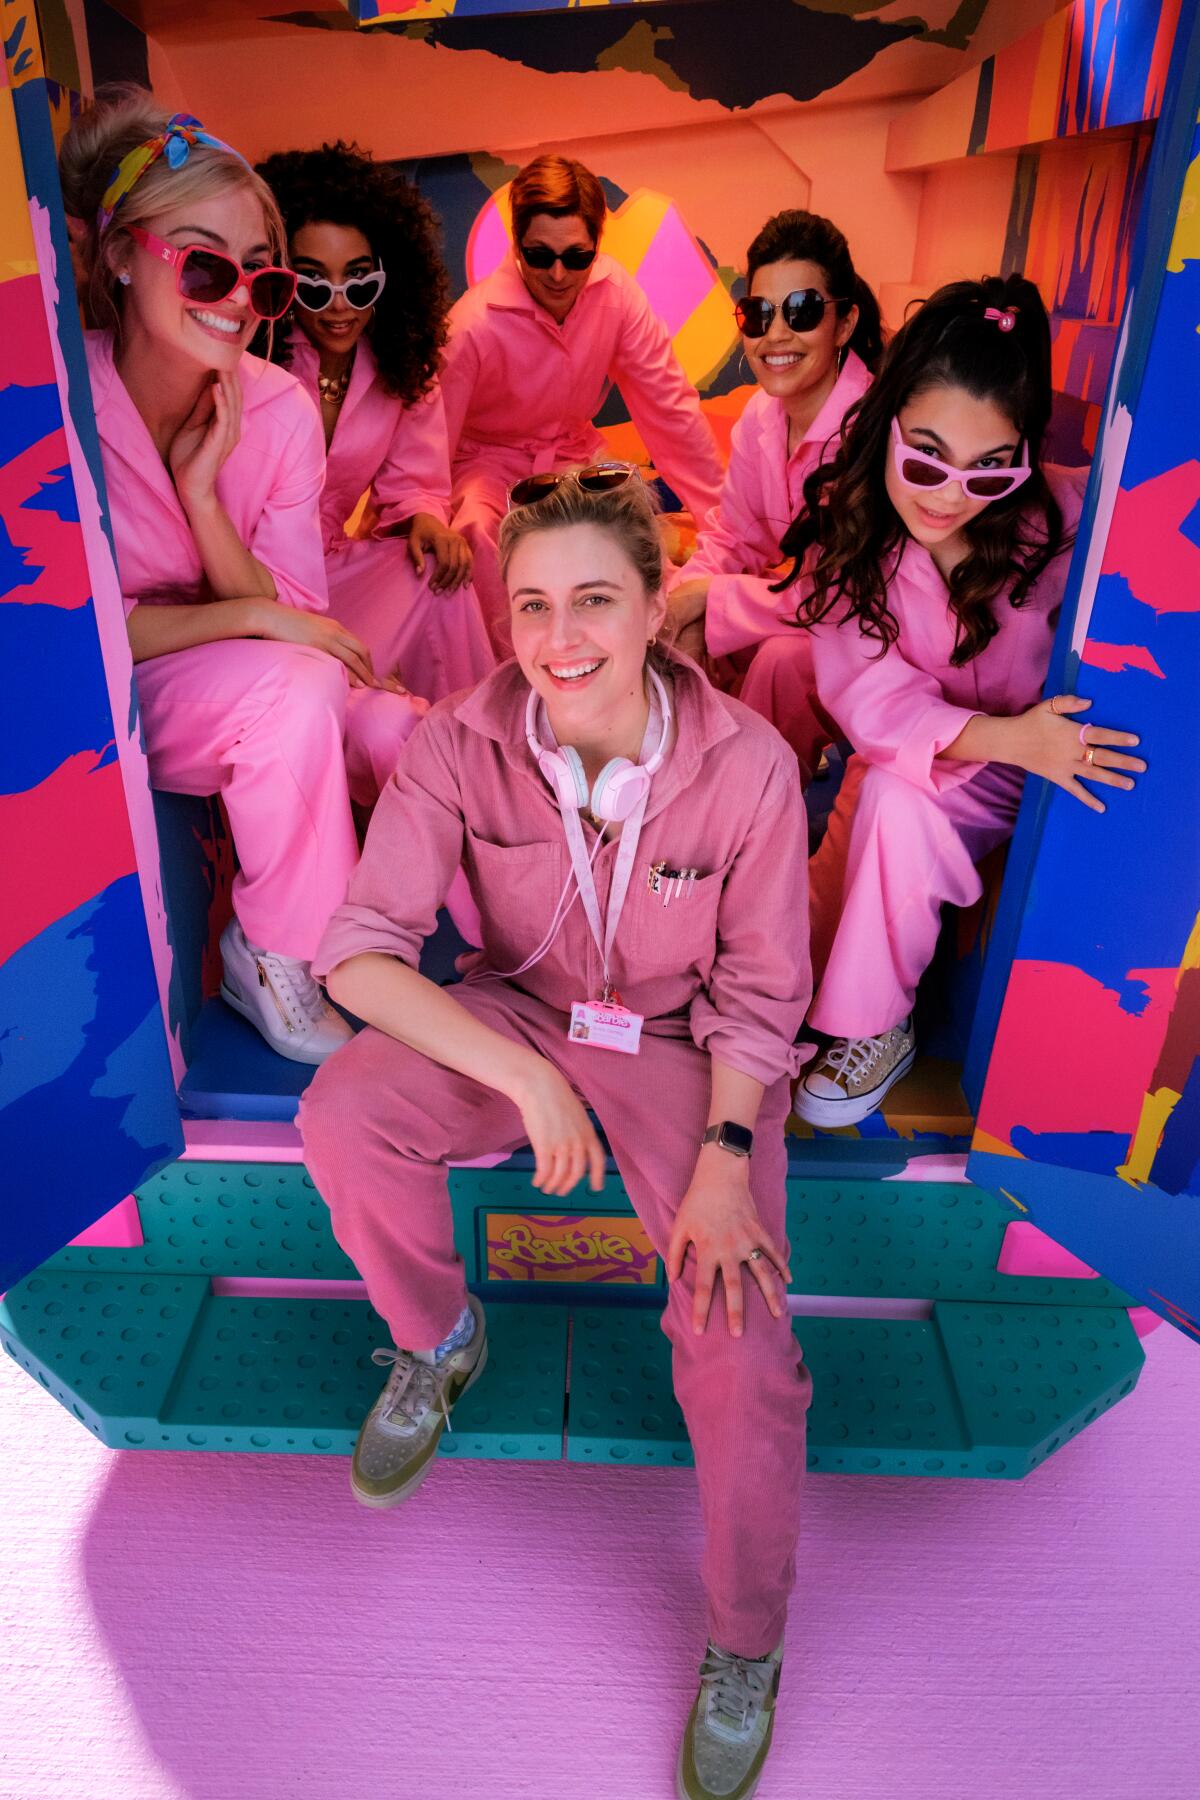 Greta Gerwig and the cast of "Barbie," all in pink uniforms, pose in the back of a pink truck from the movie